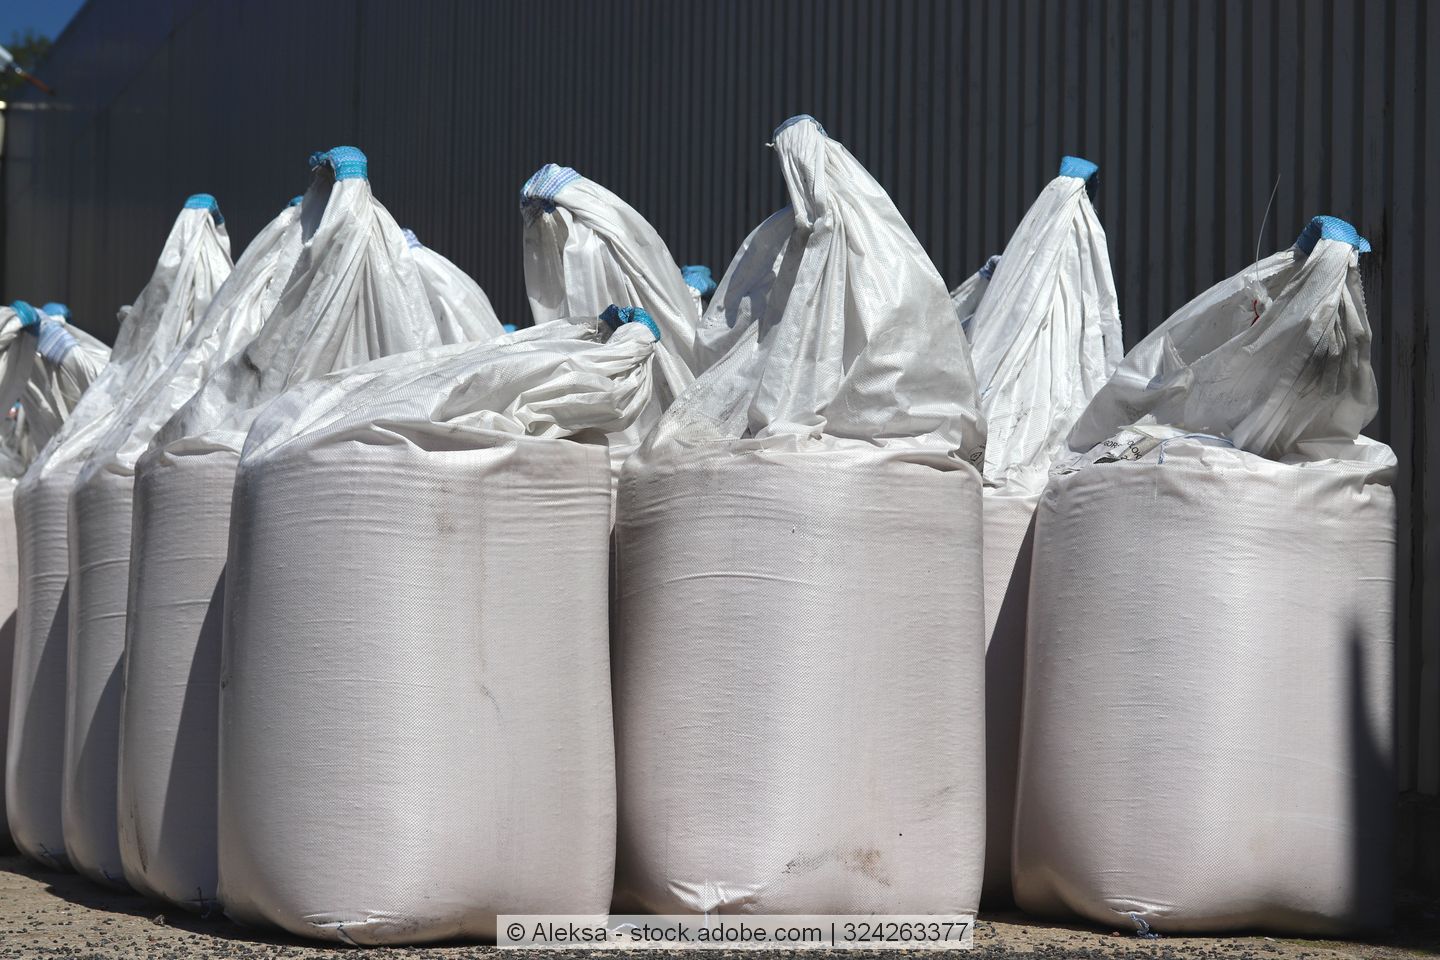 Big-Bags with chemcial fertiliser stand in a row.